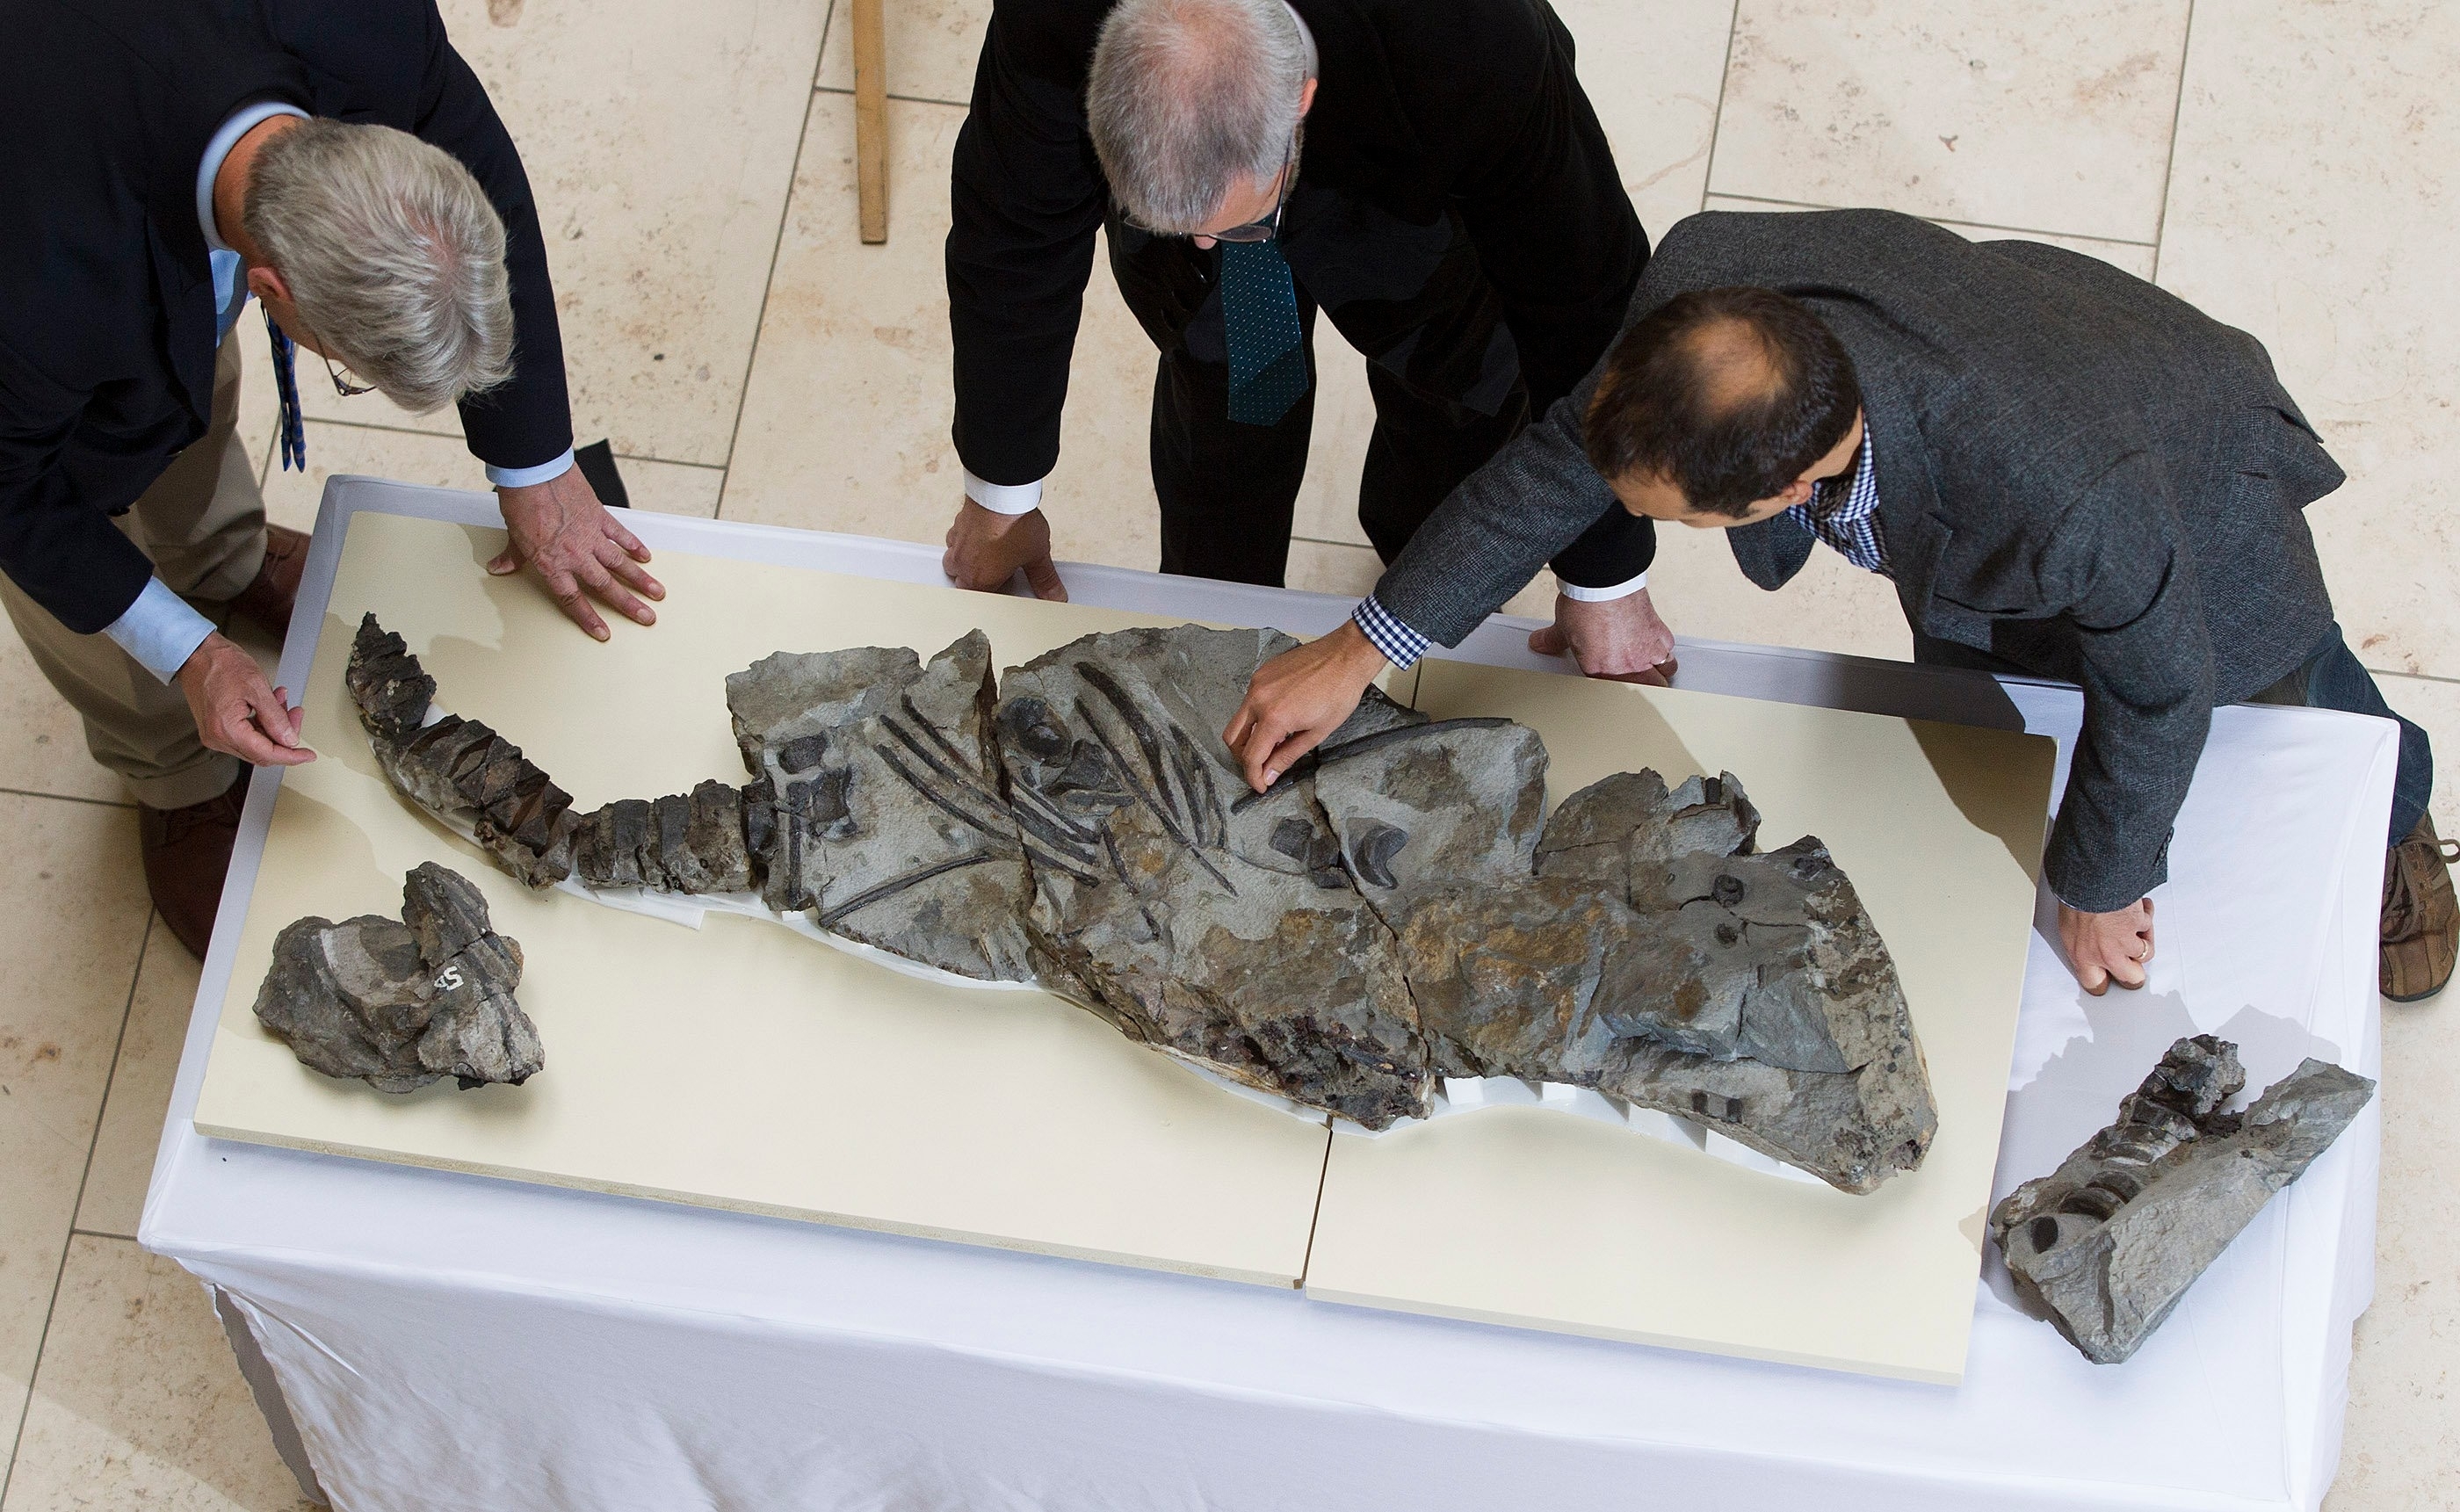 The fossil of a fierce predator that prowled the oceans 170 million years ago is unveiled by scientists for the first time at the National Museum of Scotland. The fossilised skeleton of the dolphin-like animal – named the Storr Lochs Monster – was found on the Isle of Skye in 1966 by Norrie Gillies.